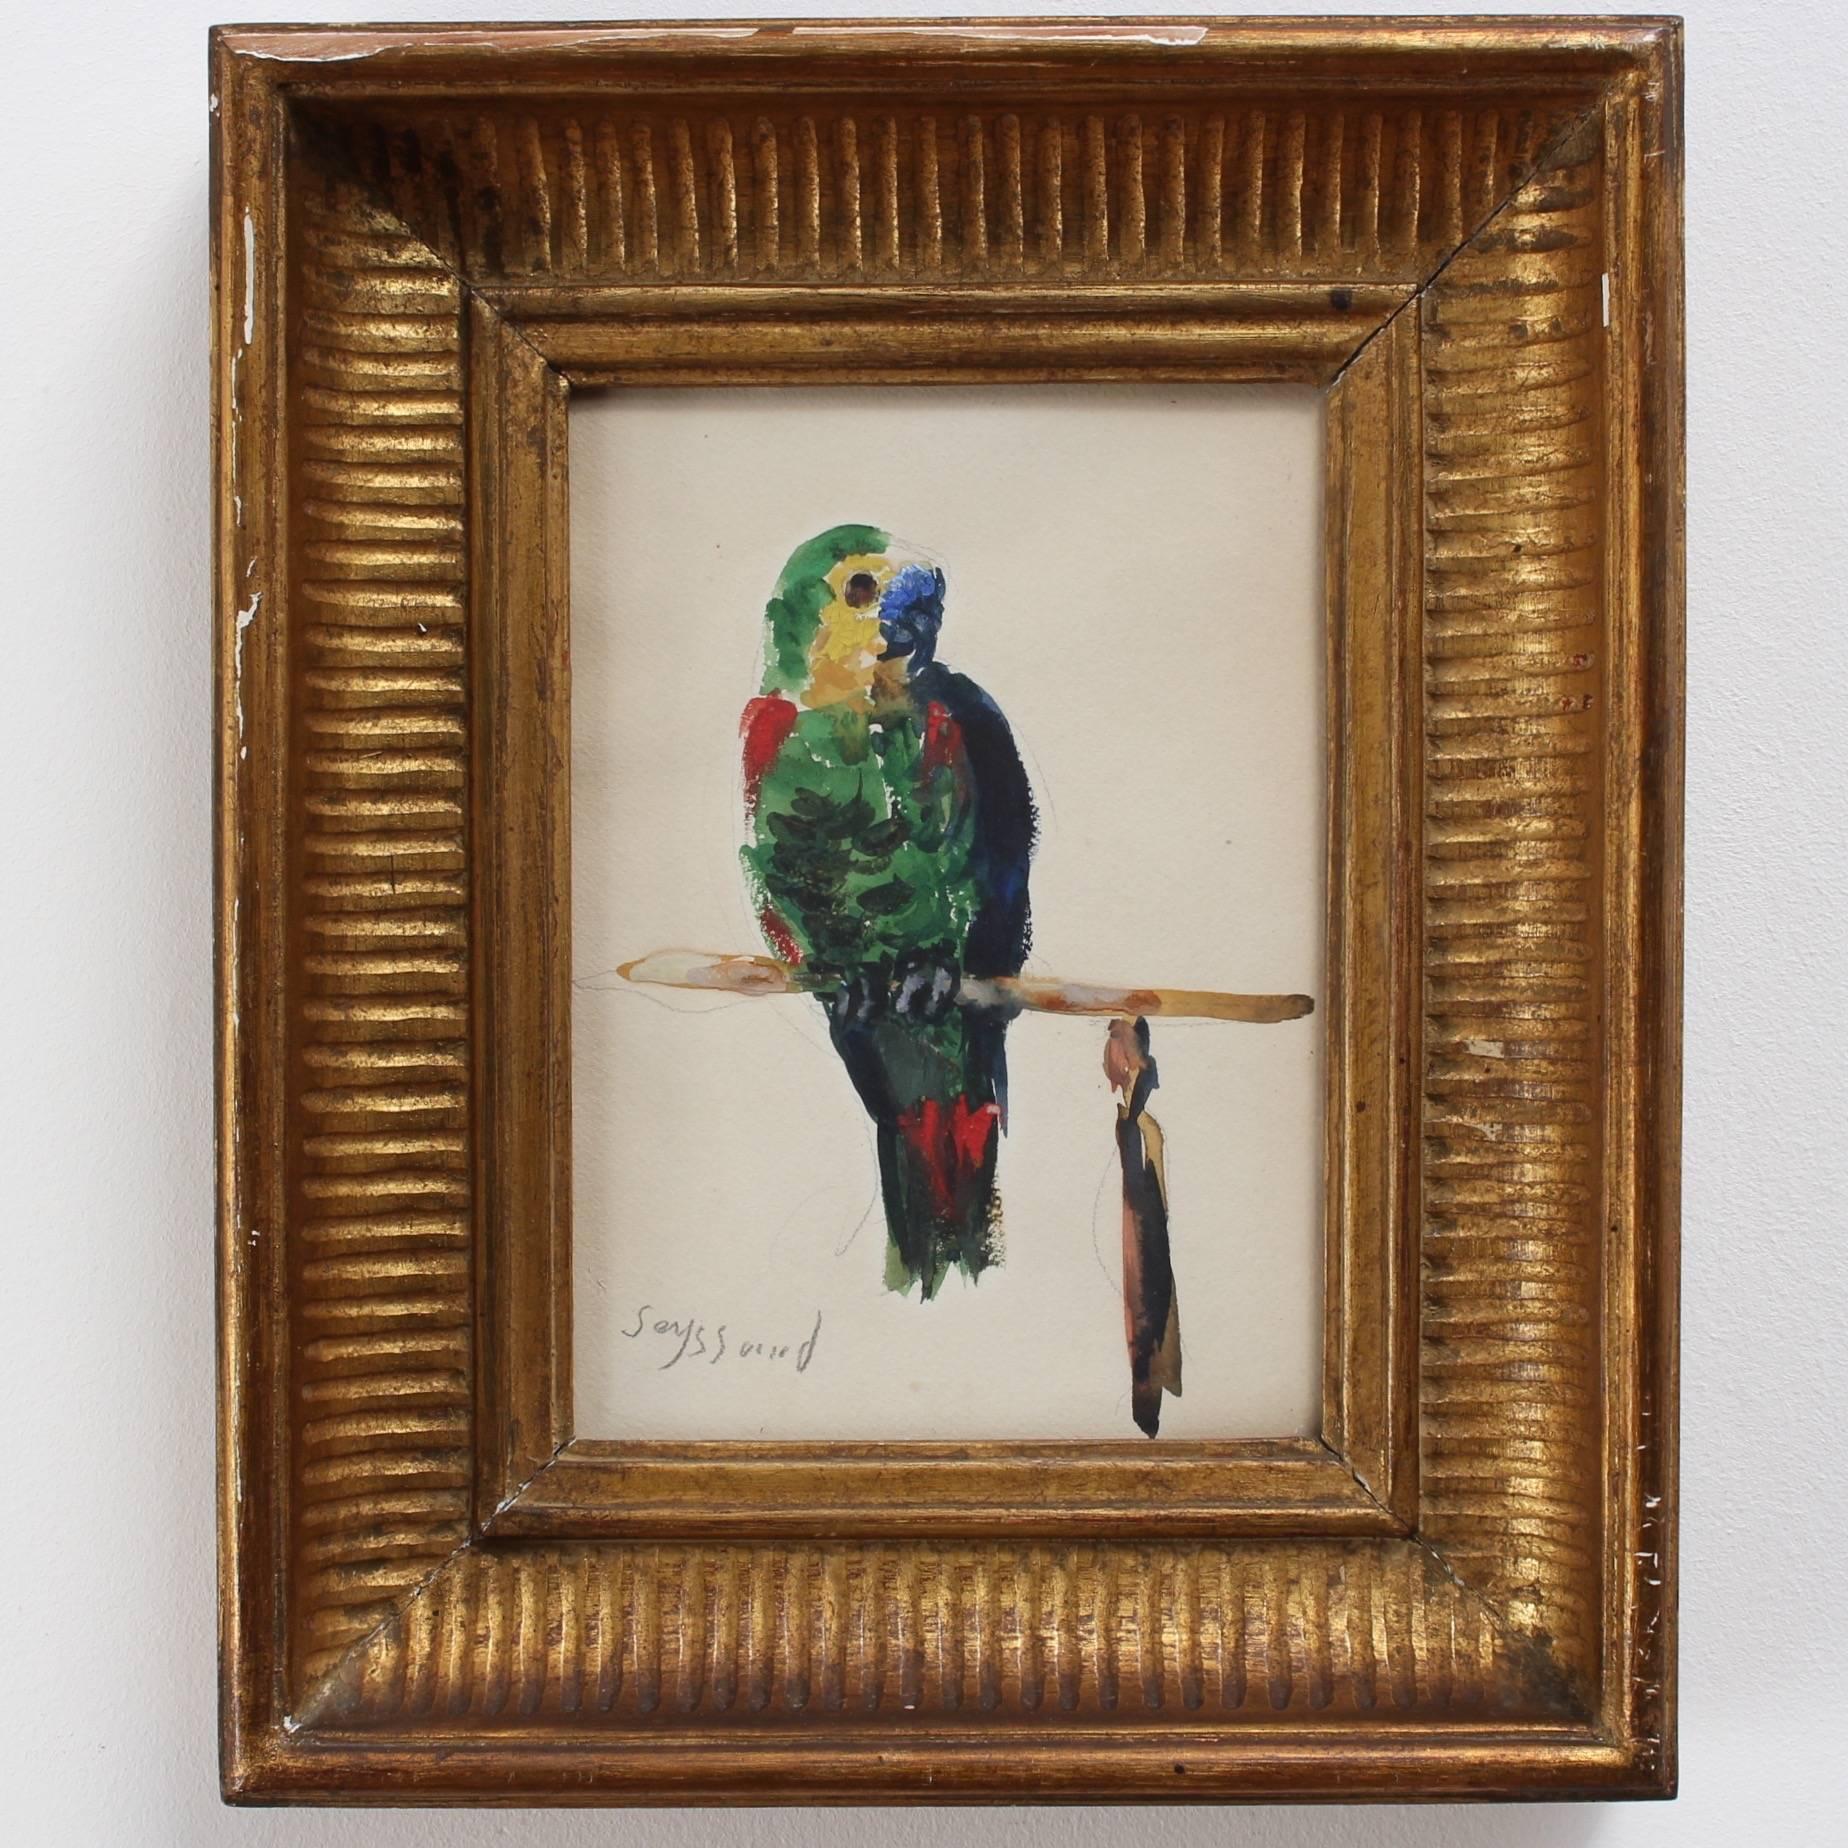 'The Parakeet' (Le Perroquet), watercolour on paper (circa 1930s), by René Seyssaud (1867 -1952). An artwork for bird lovers and experts in ornithology, this beautiful depiction of a parakeet is by this renown French painter. The vivid greens,